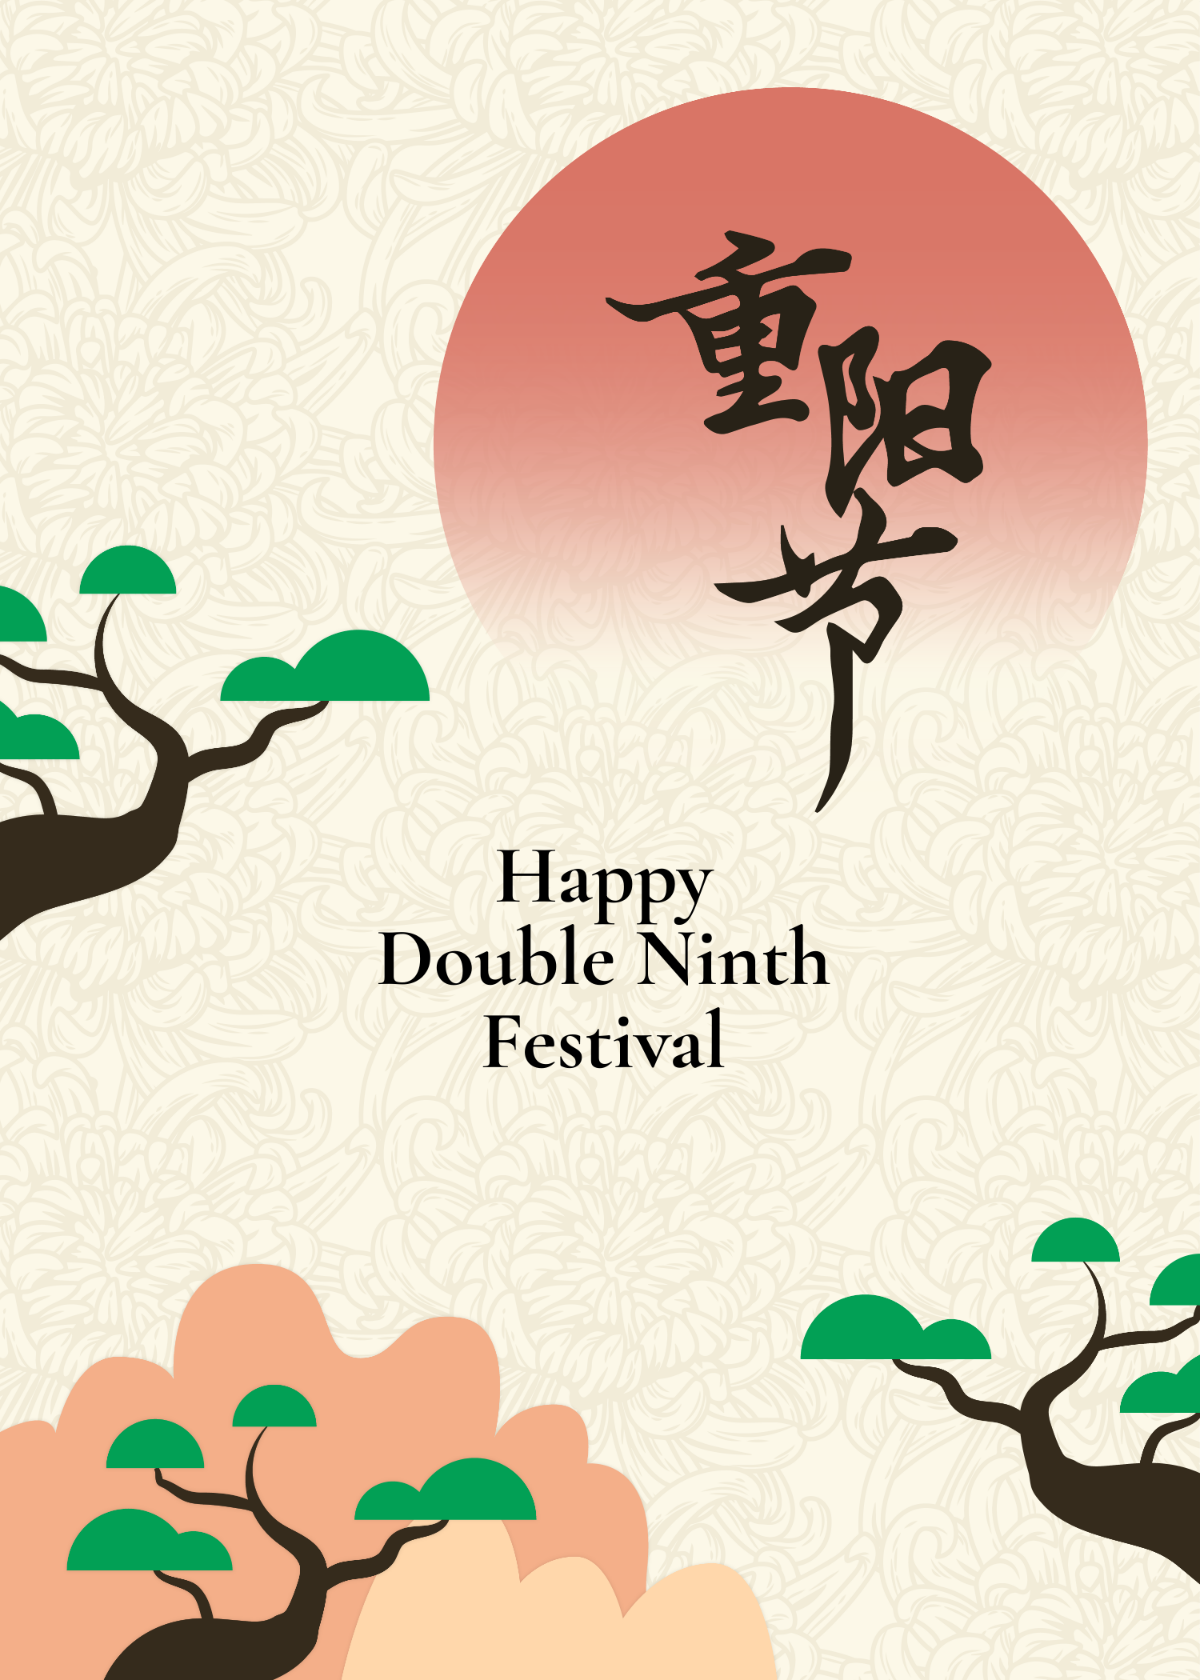 Double Ninth Festival Greeting Card